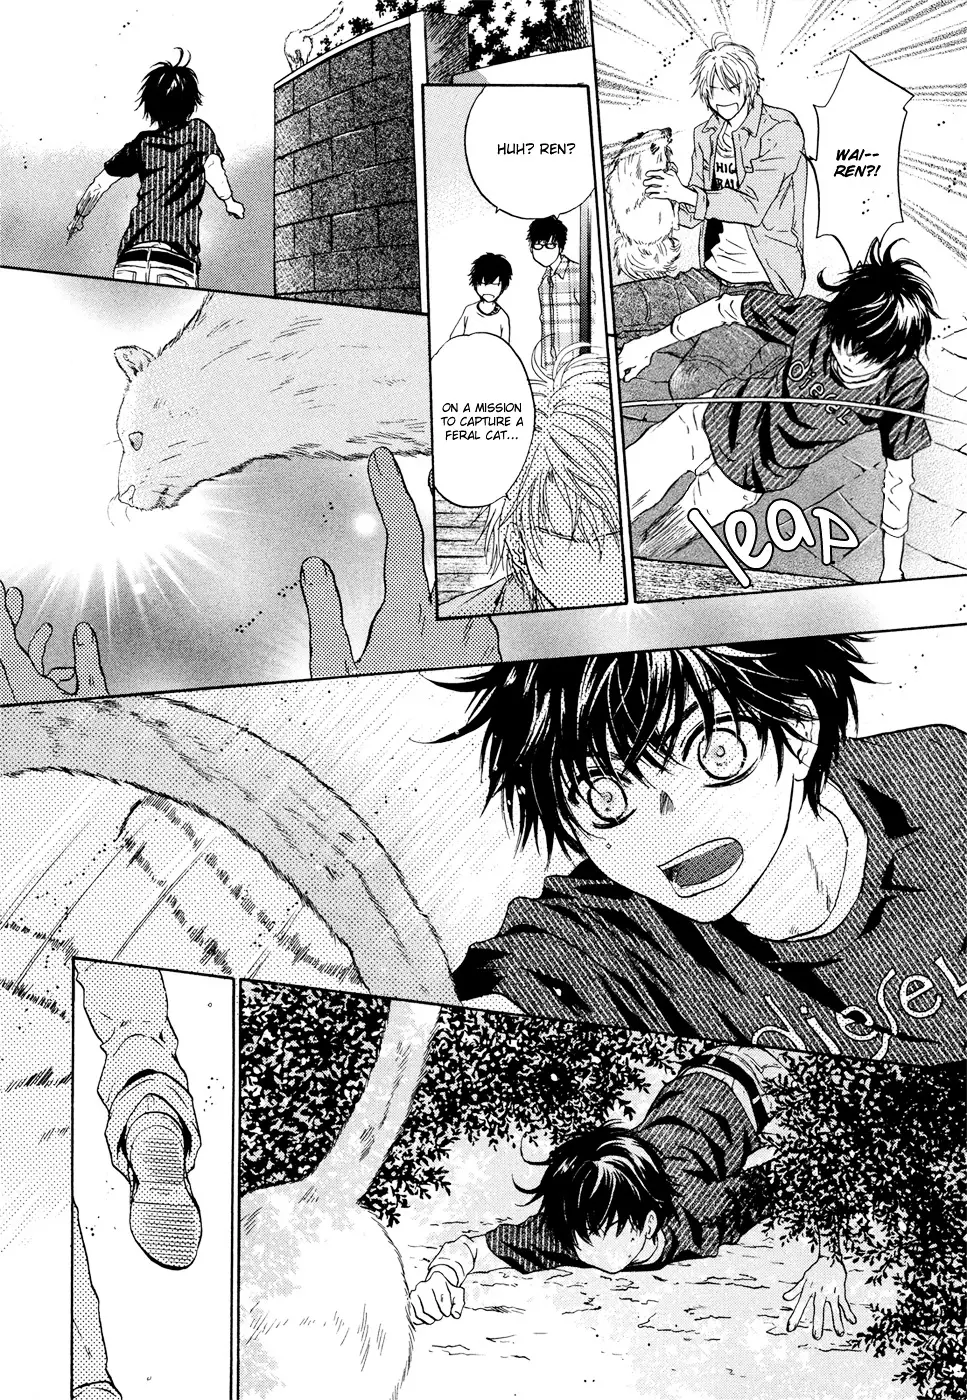 Super Lovers - 6 page 62-65067bb4